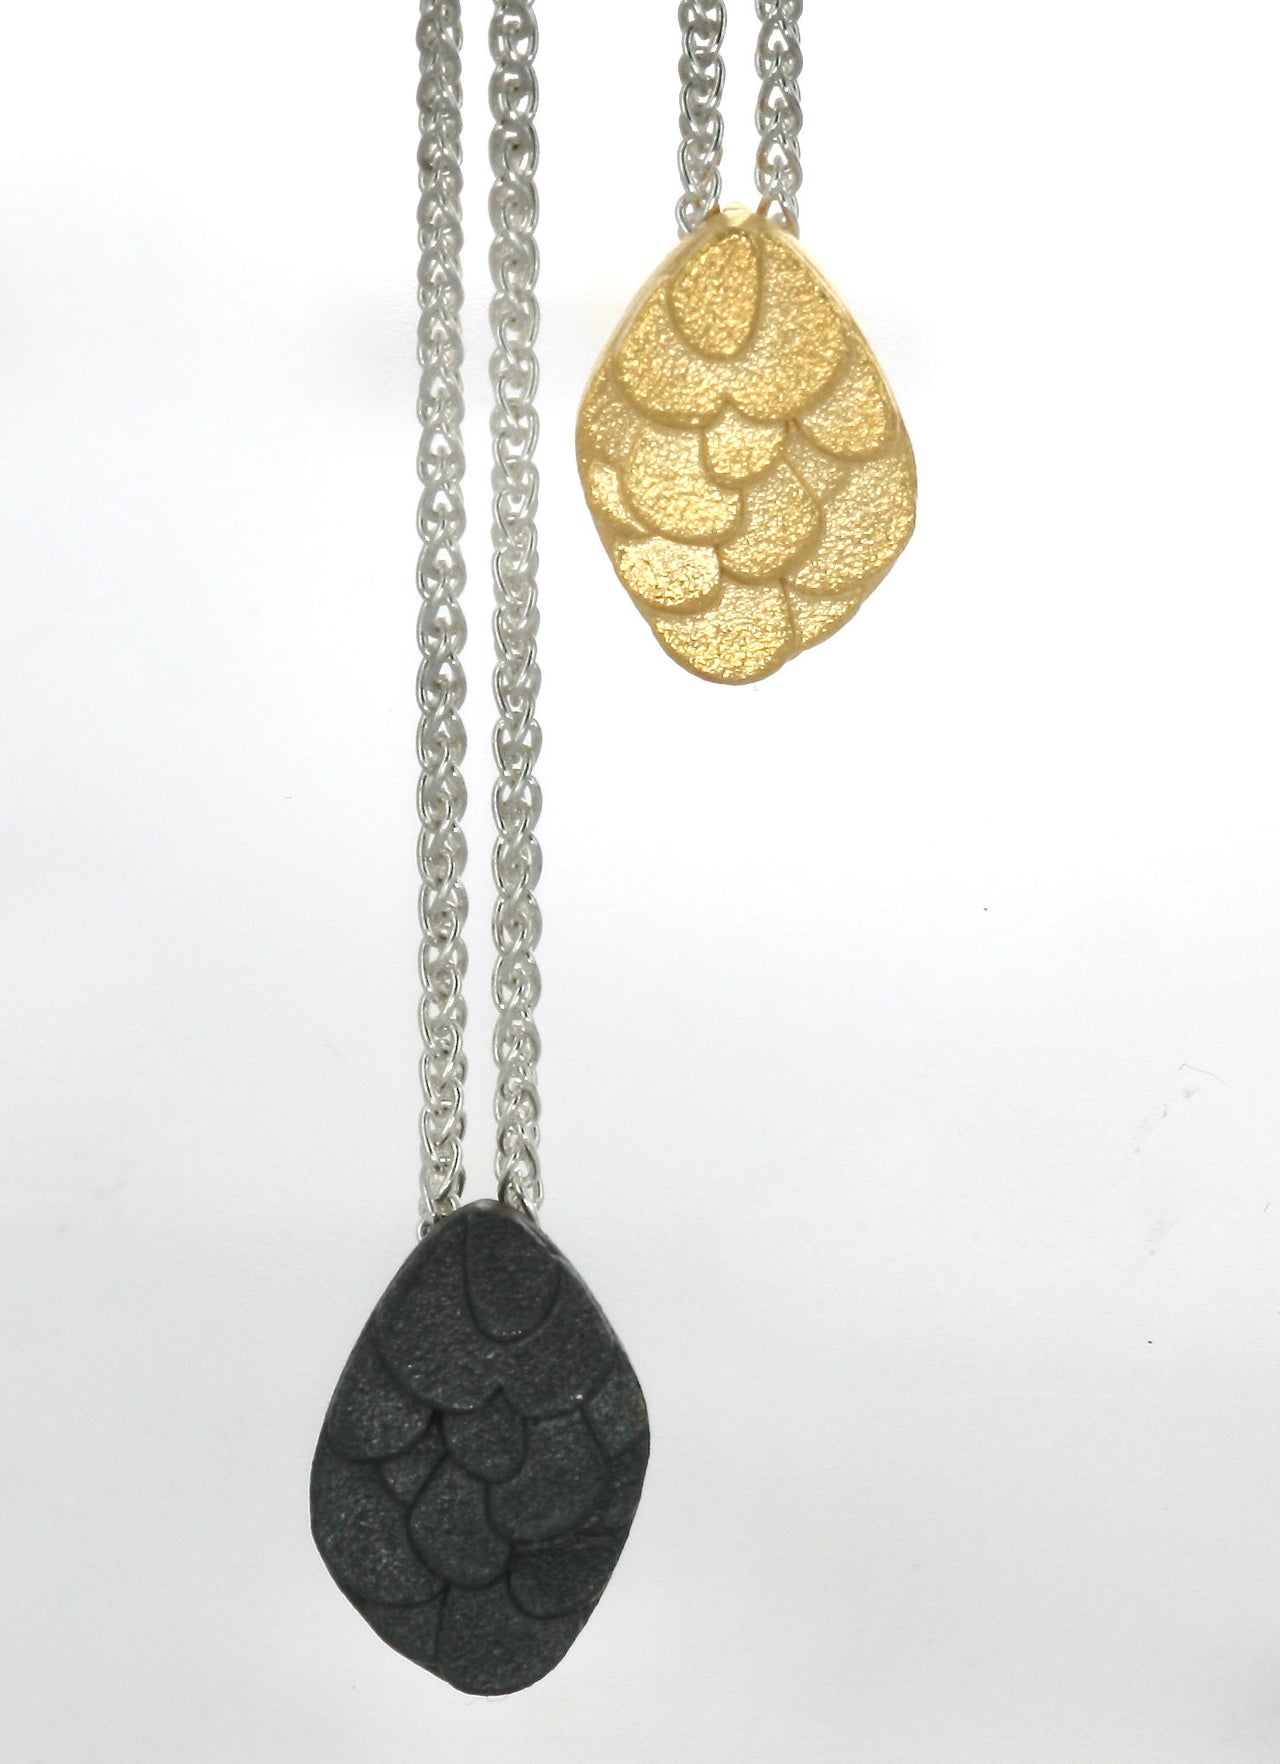 Textured Gold & Sterling Silver Pendant